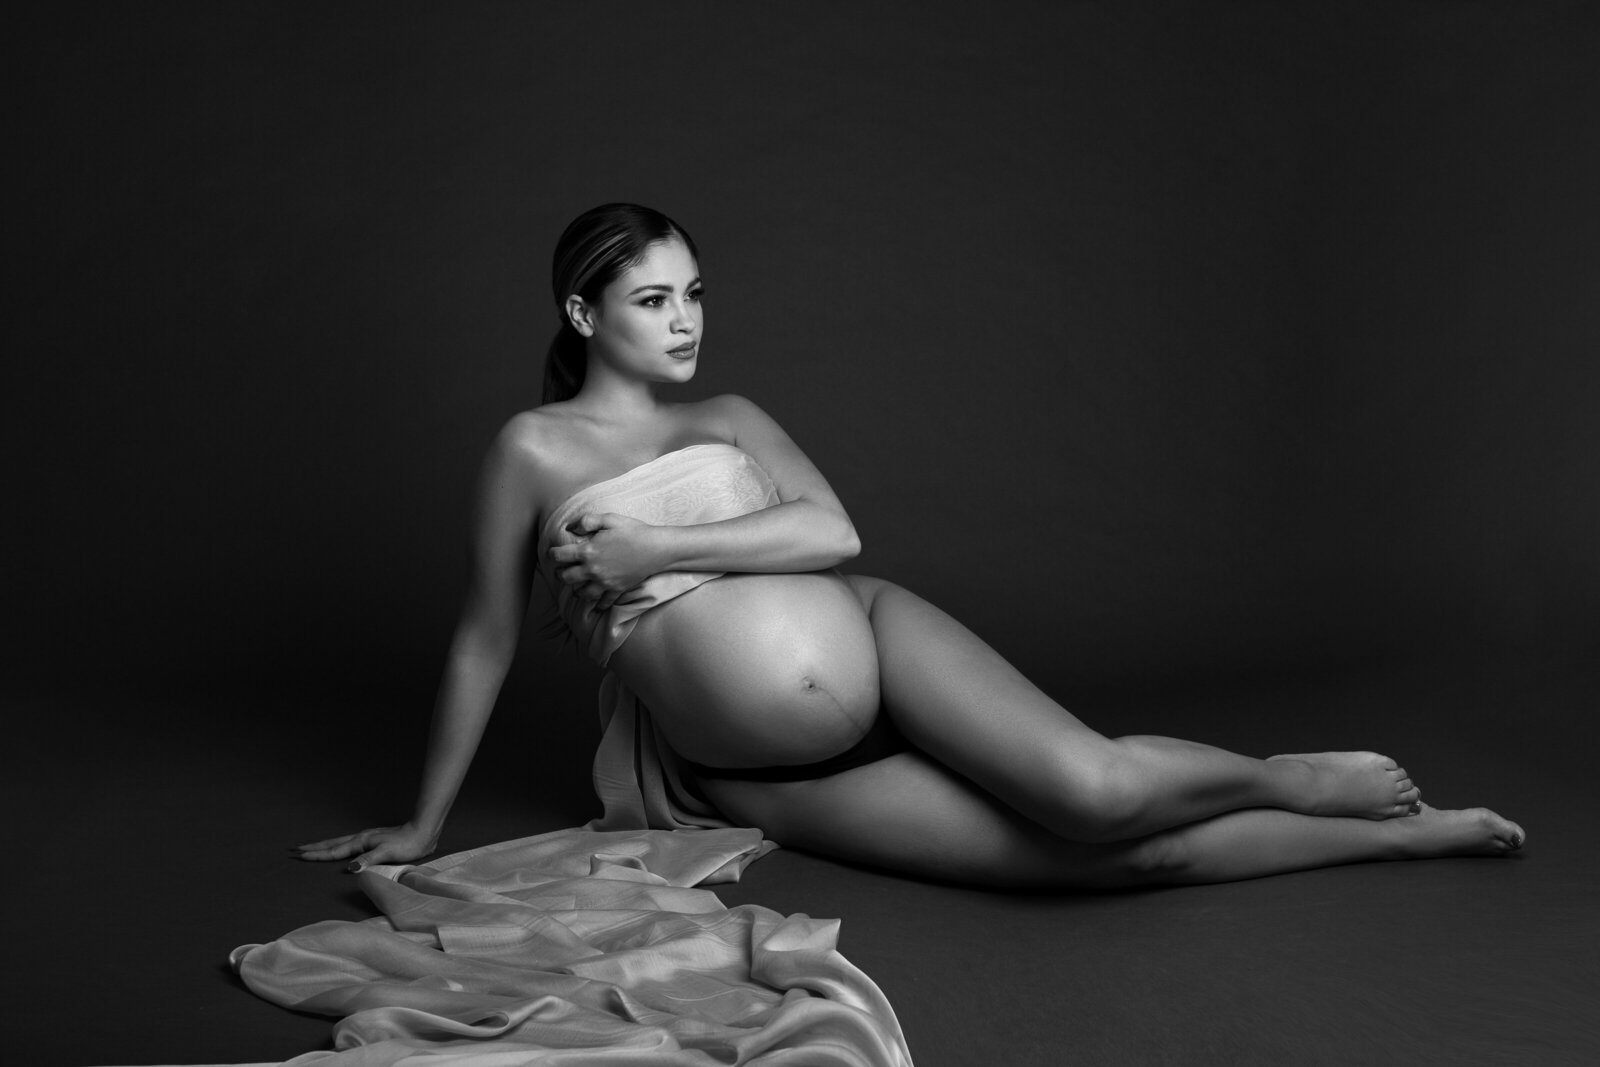 Beautiful black and white maternity photography by Daisy Rey  in New York photo studio